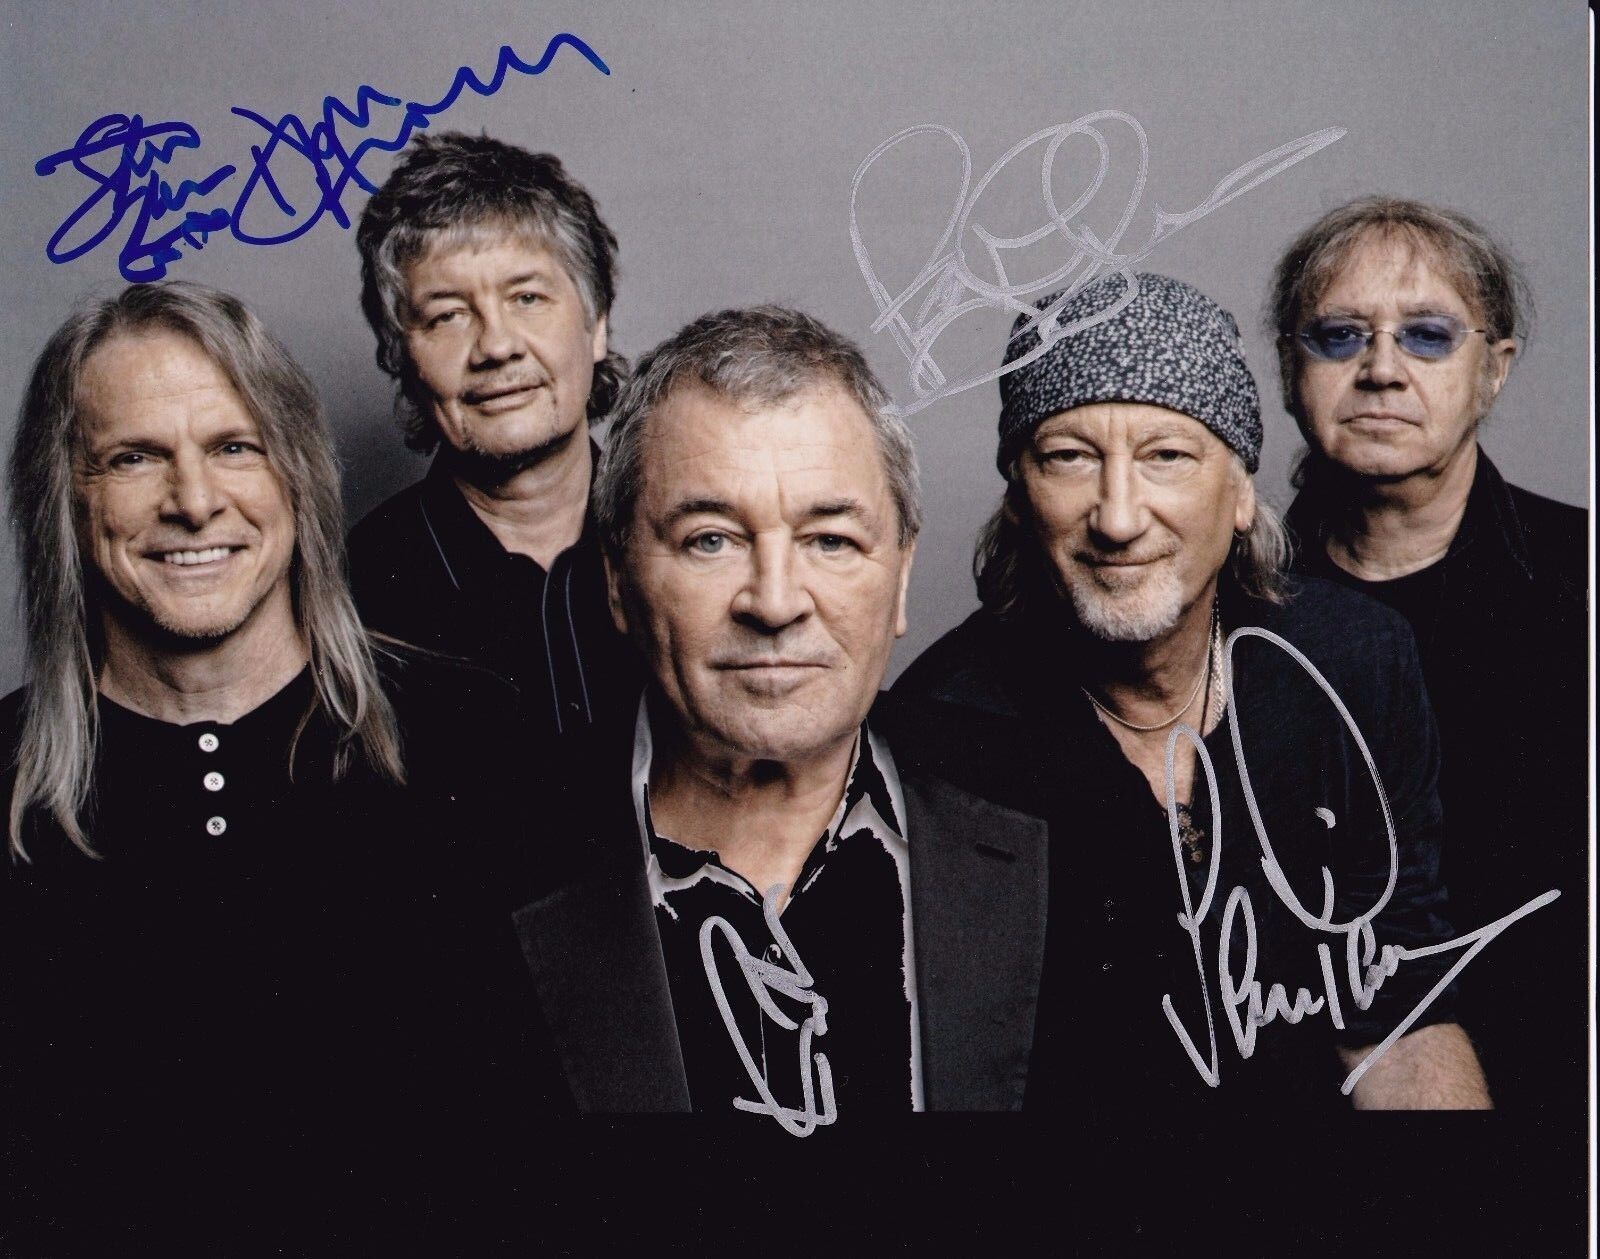 Deep Purple Complete #1 autographed by all band members 8x10 Photo Poster painting  Shipping